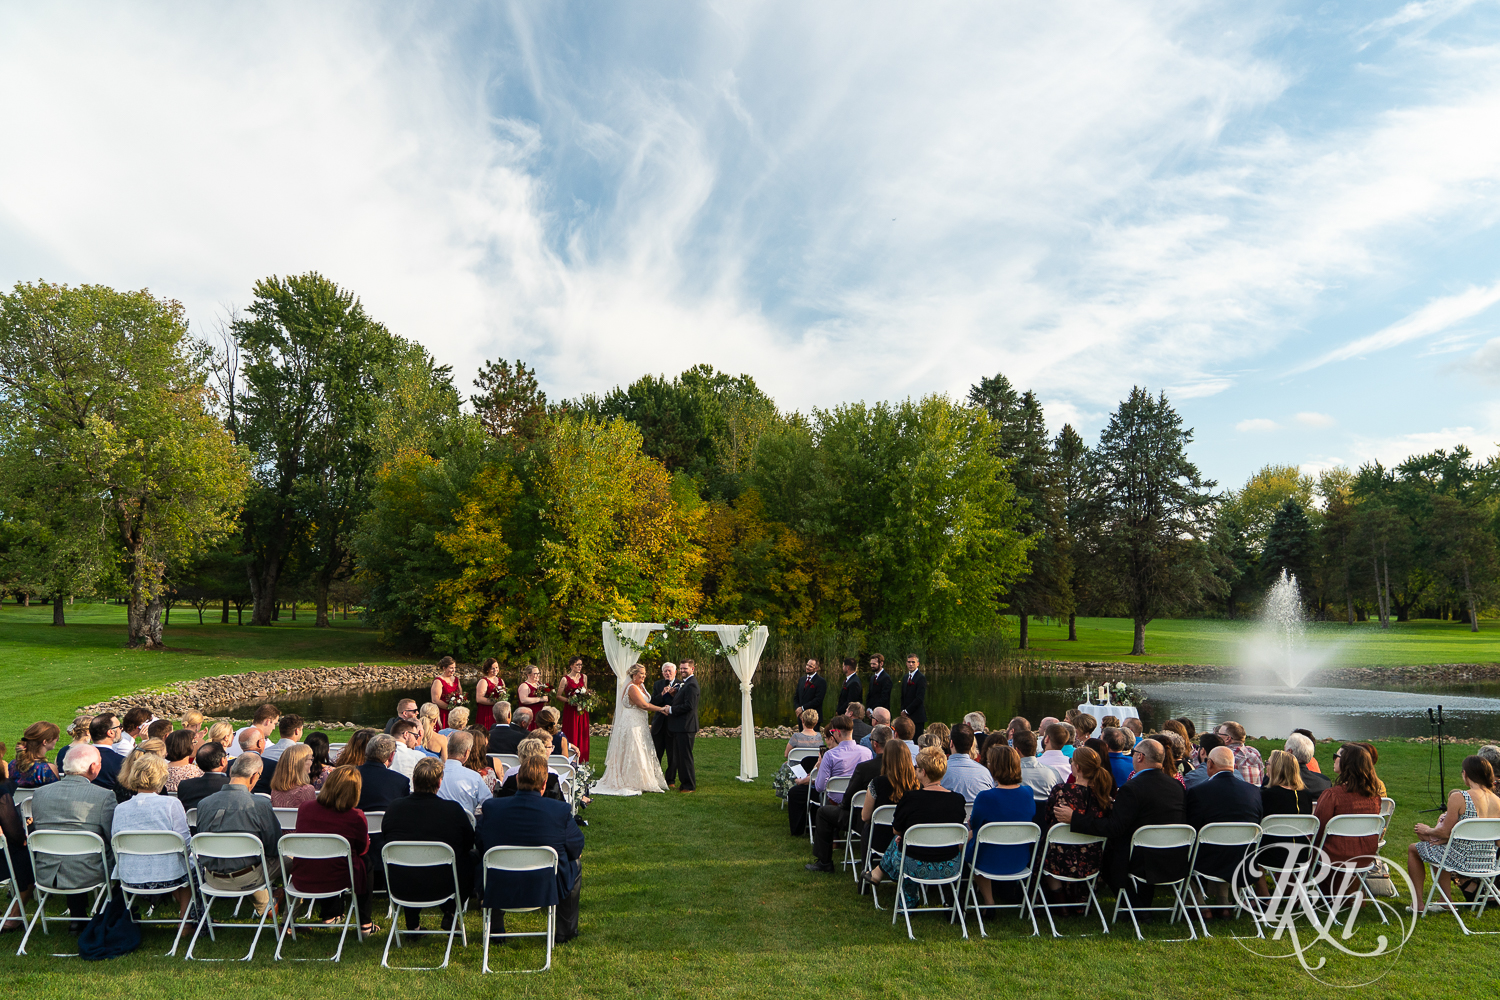 Bride and groom stand at alter during outdoor wedding ceremony at Hastings Golf Club in Hastings, Minnesota.